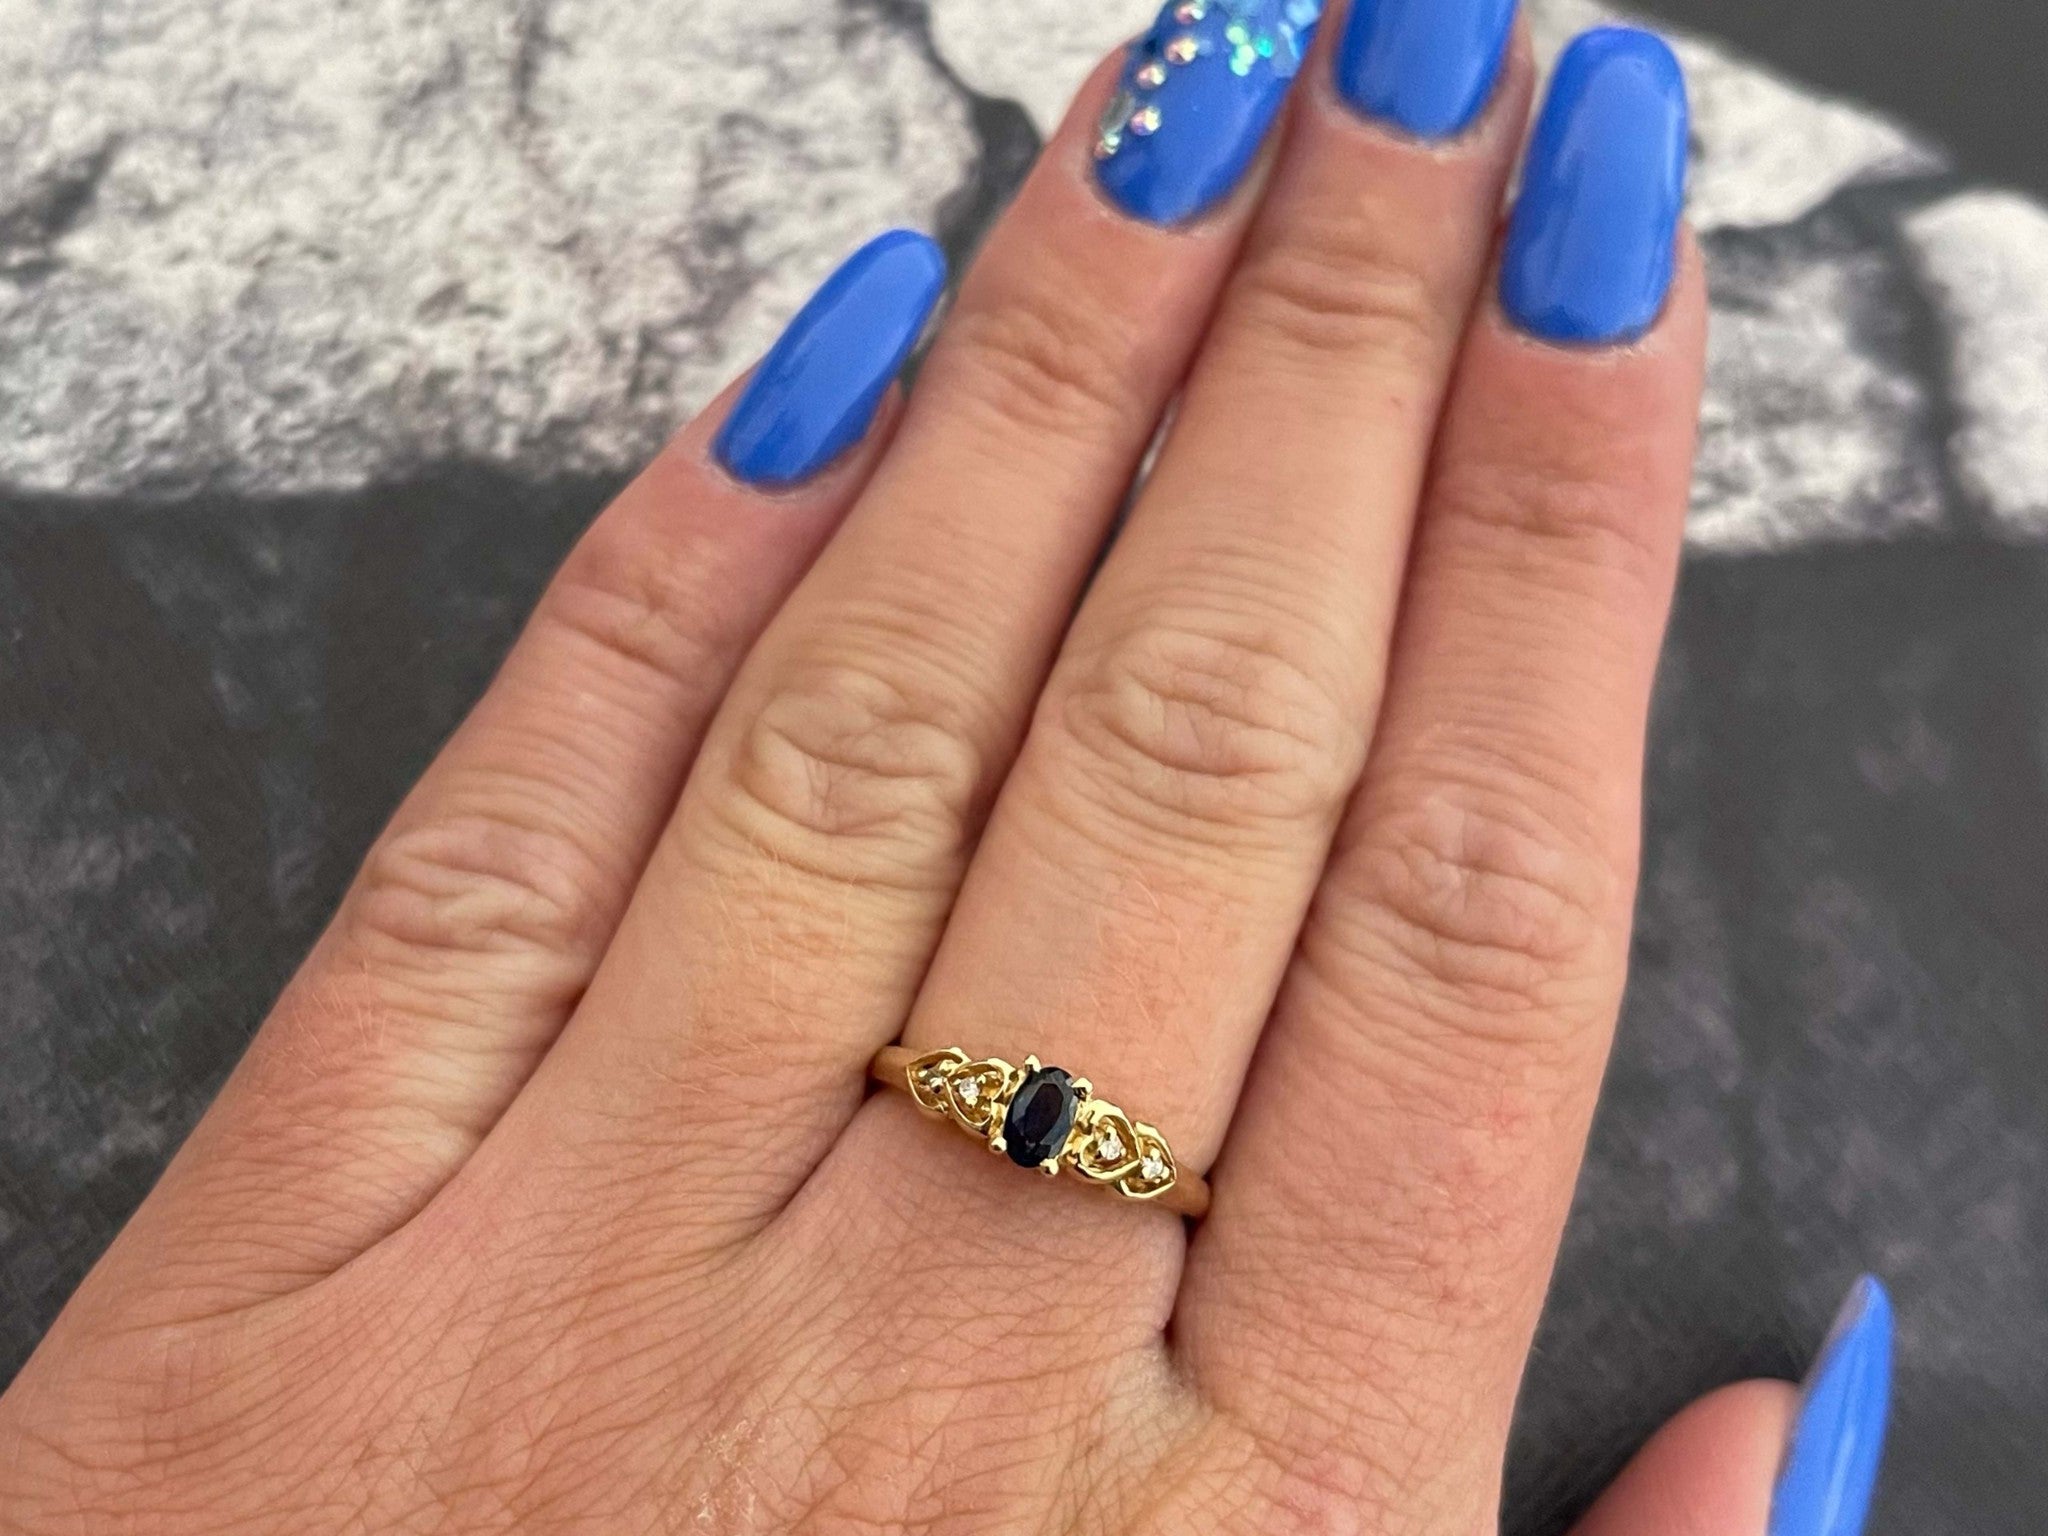 Sapphire and Diamond Ring in 14k Yellow Gold